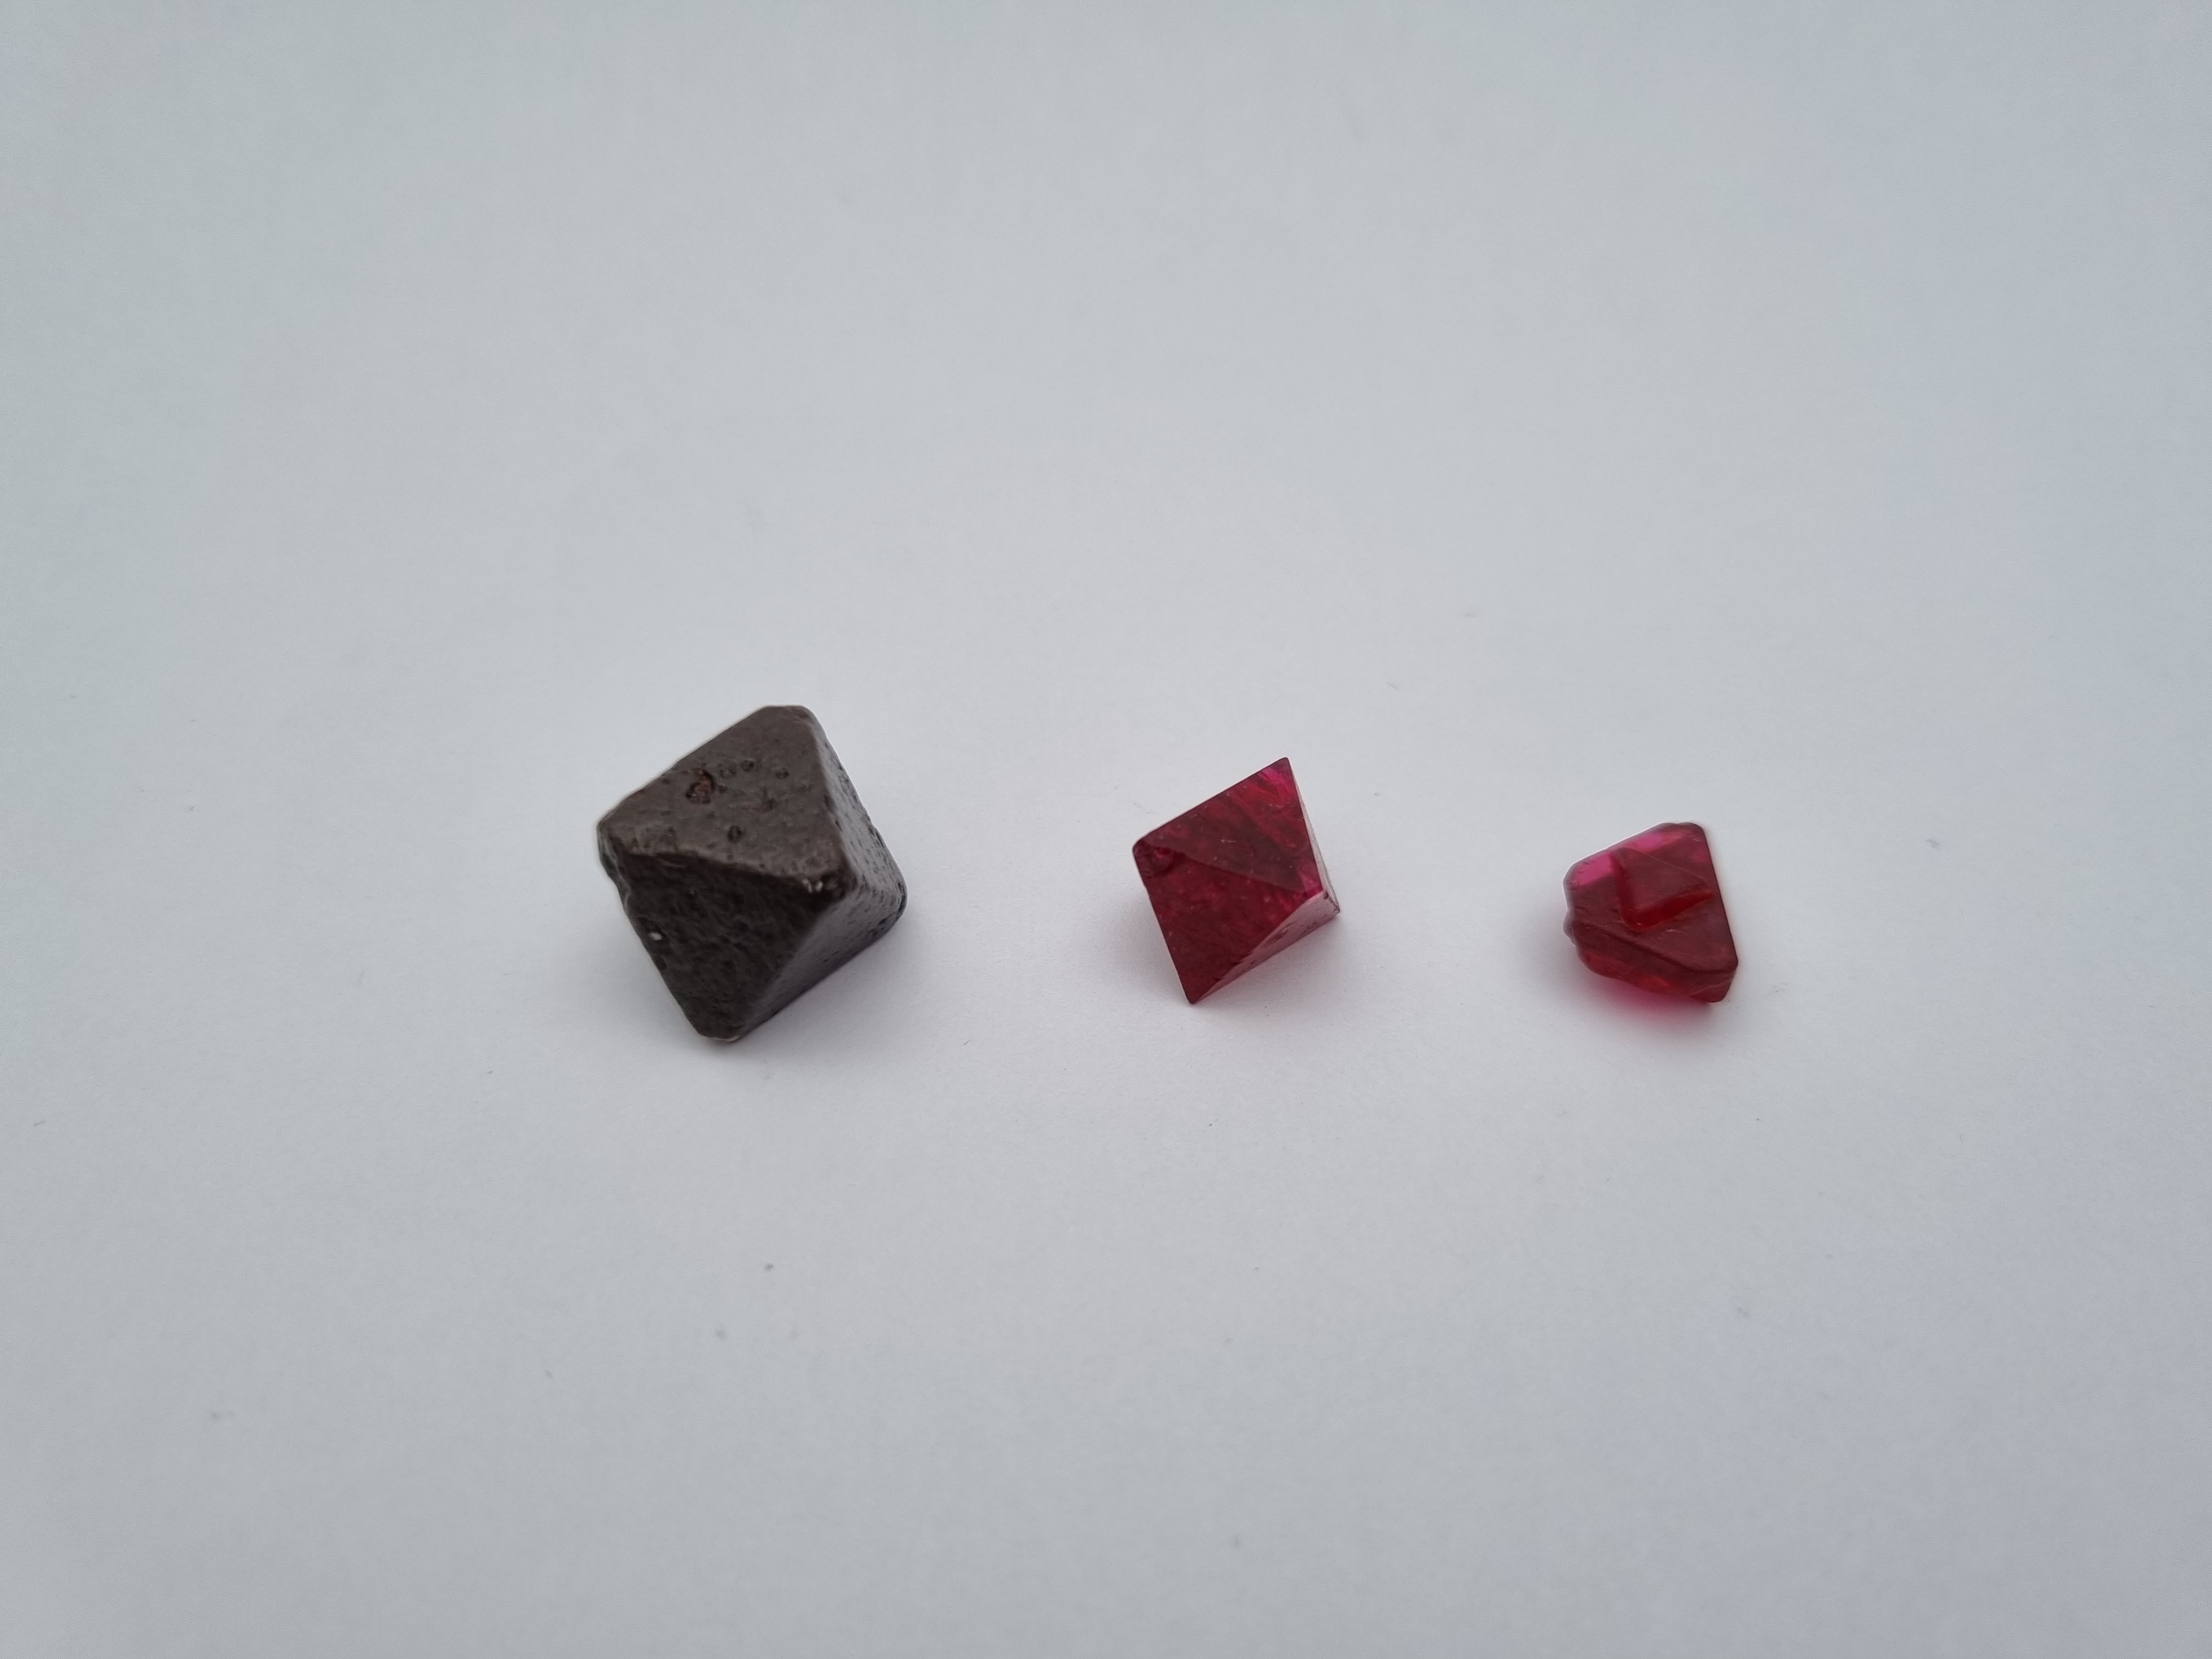 Rough spinel crystals 